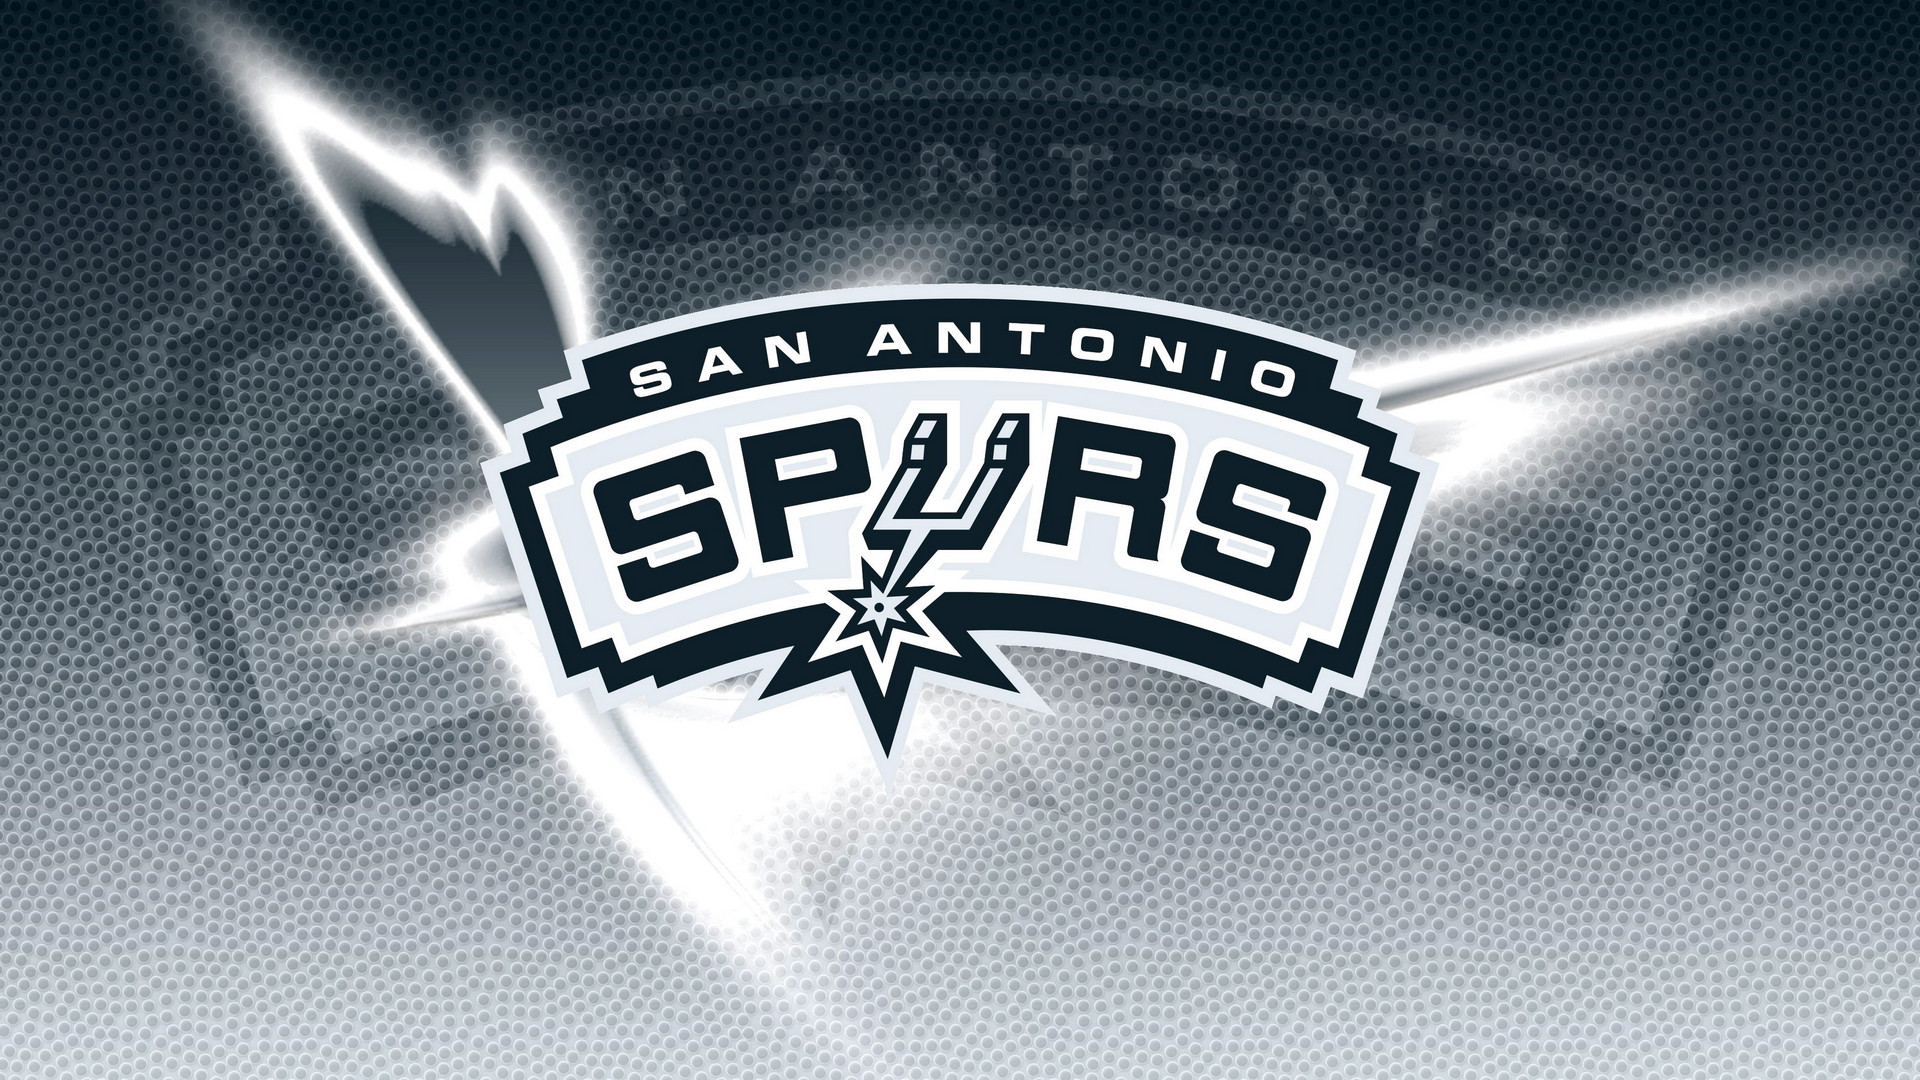 San Antonio Spurs Mac Backgrounds with high-resolution 1920x1080 pixel. You can use this wallpaper for your Desktop Computer Backgrounds, Windows or Mac Screensavers, iPhone Lock screen, Tablet or Android and another Mobile Phone device